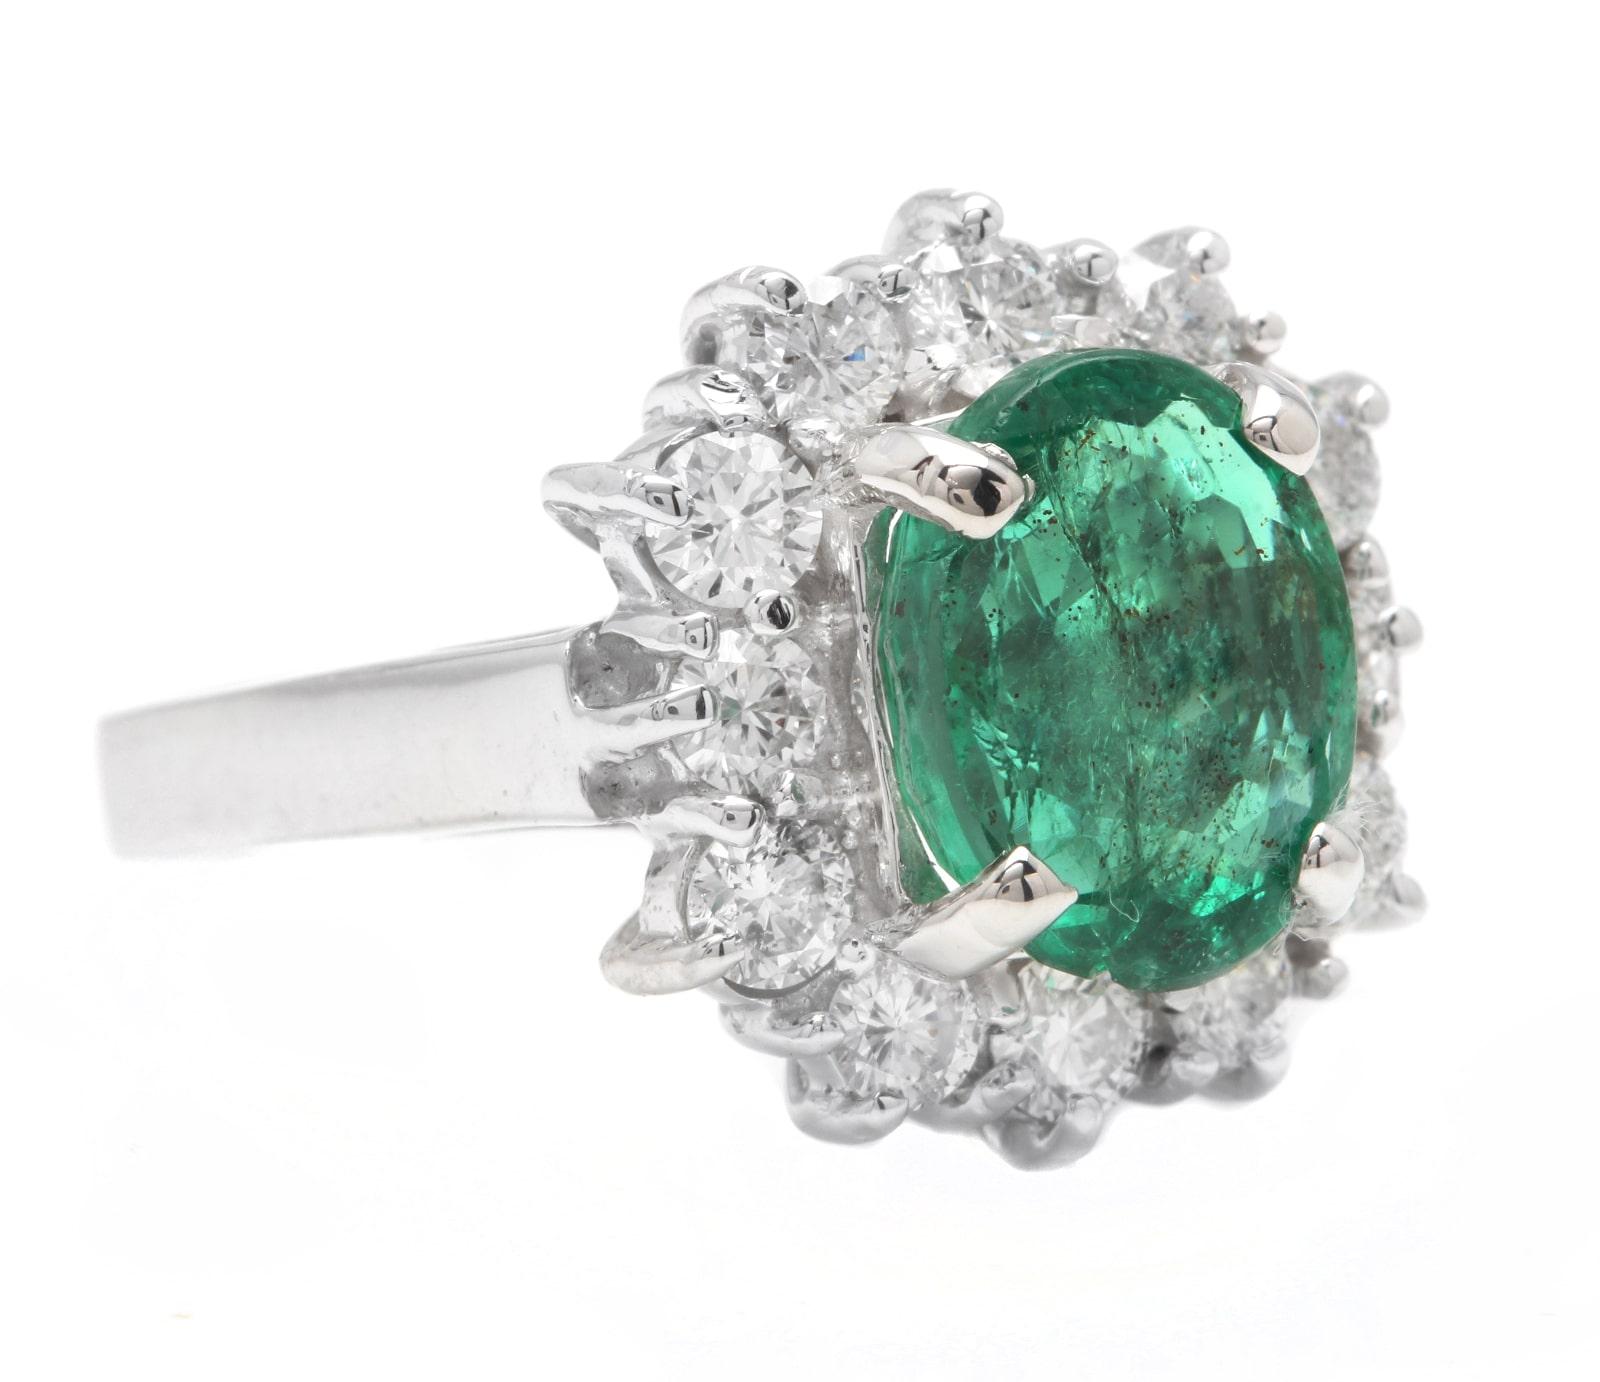 4.30 Carats Natural Emerald and Diamond 14K Solid White Gold Ring

Suggested Replacement Value:  Approx. $8,600.00

Total Natural Cushion Cut Emerald Weight is: Approx. 3.00 Carats (transparent )

Emerald Measures: Approx.  10.00 x 8.00mm

Emerald